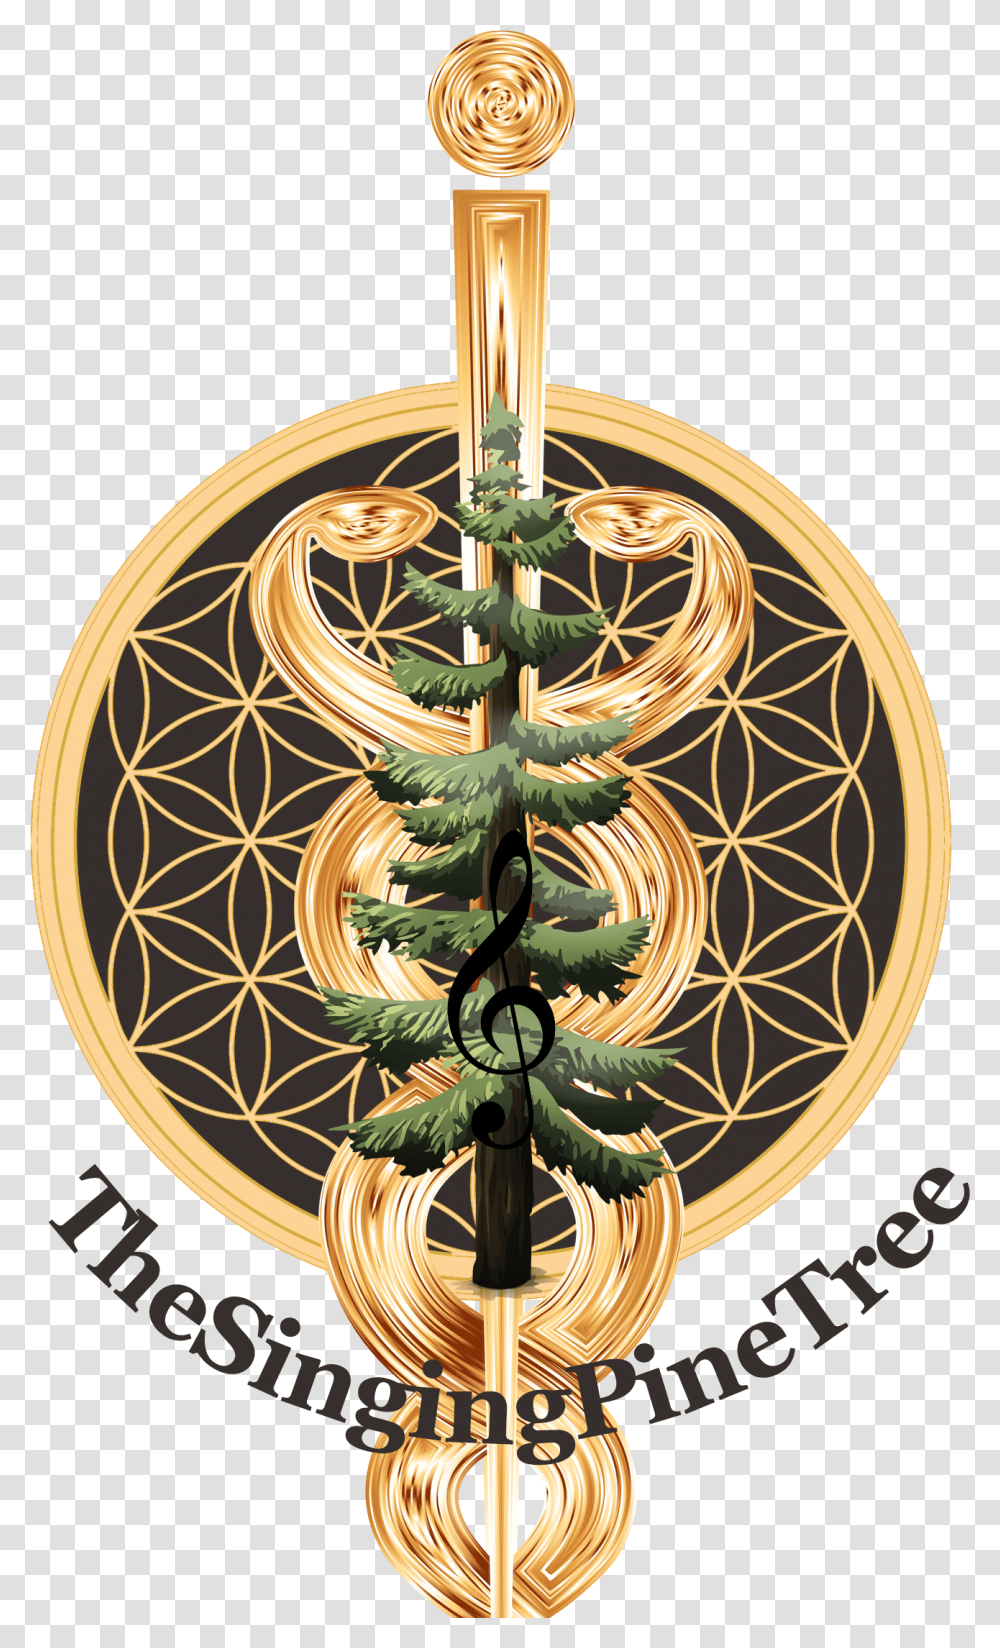 Home The Singing Pine Tree, Chandelier, Lamp, Ornament, Plant Transparent Png